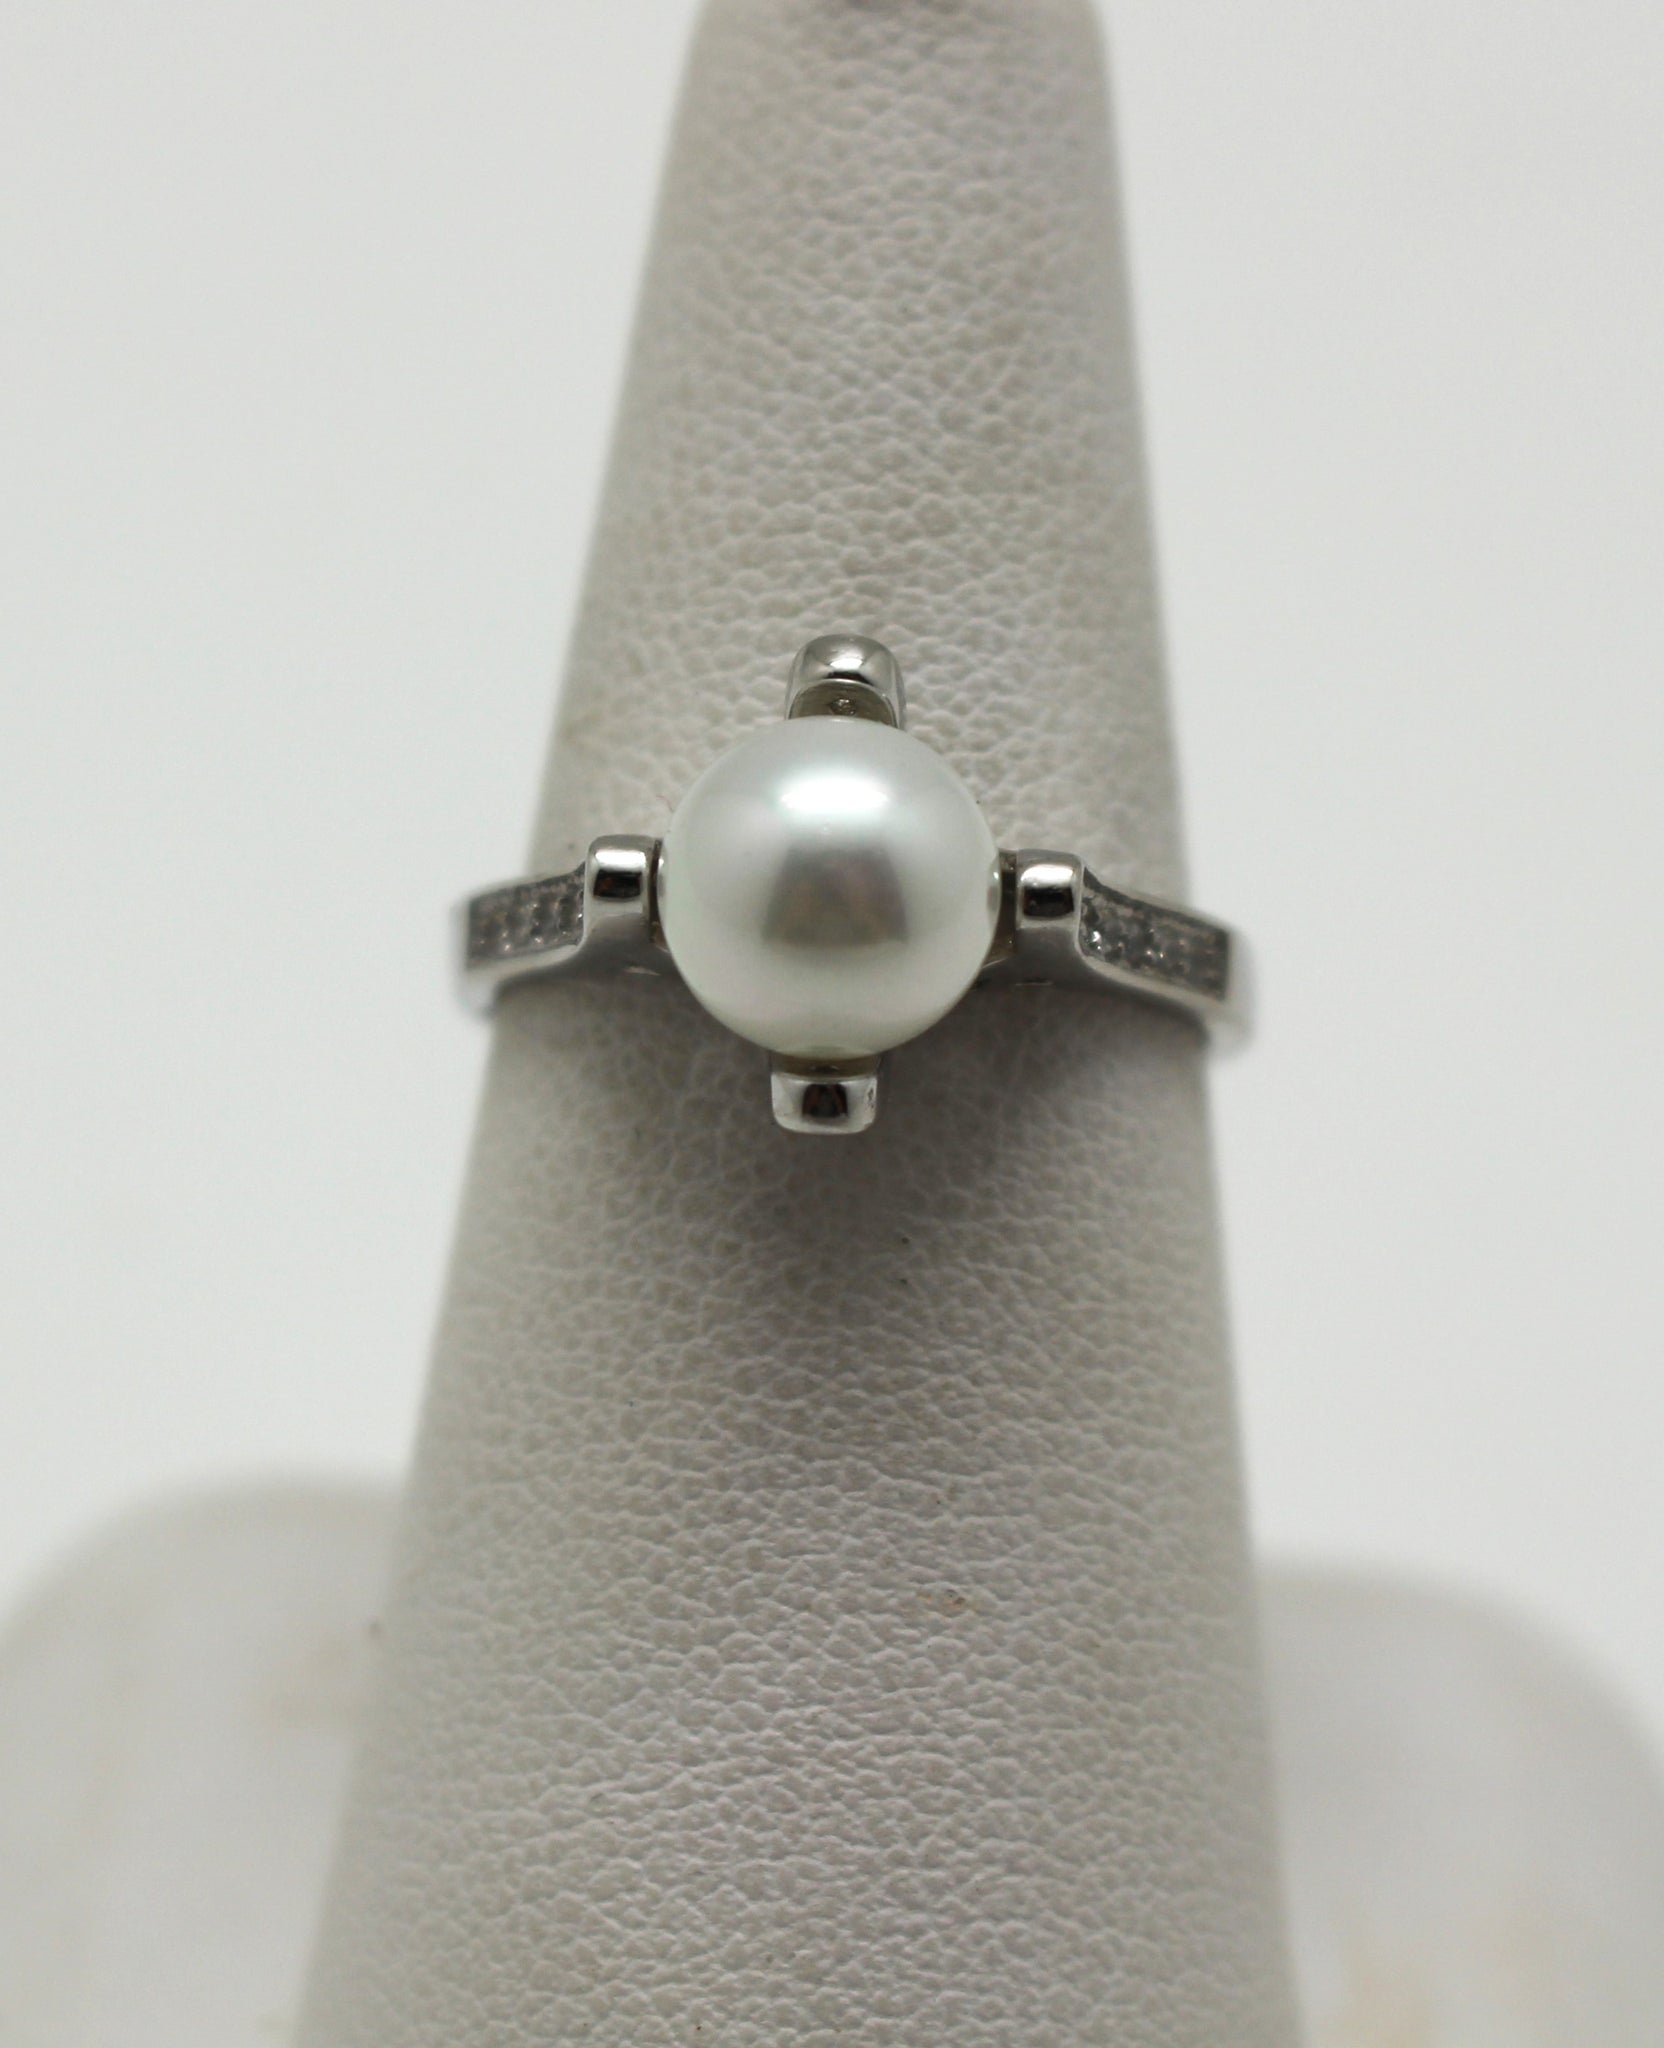 Amazon.com: Pearl ring, silver pearl ring, white pearl ring, sterling silver  ring, tiny ring, unique ring with pearls, silver ring for women  (rhodium-plated-silver, 8.75) : Handmade Products